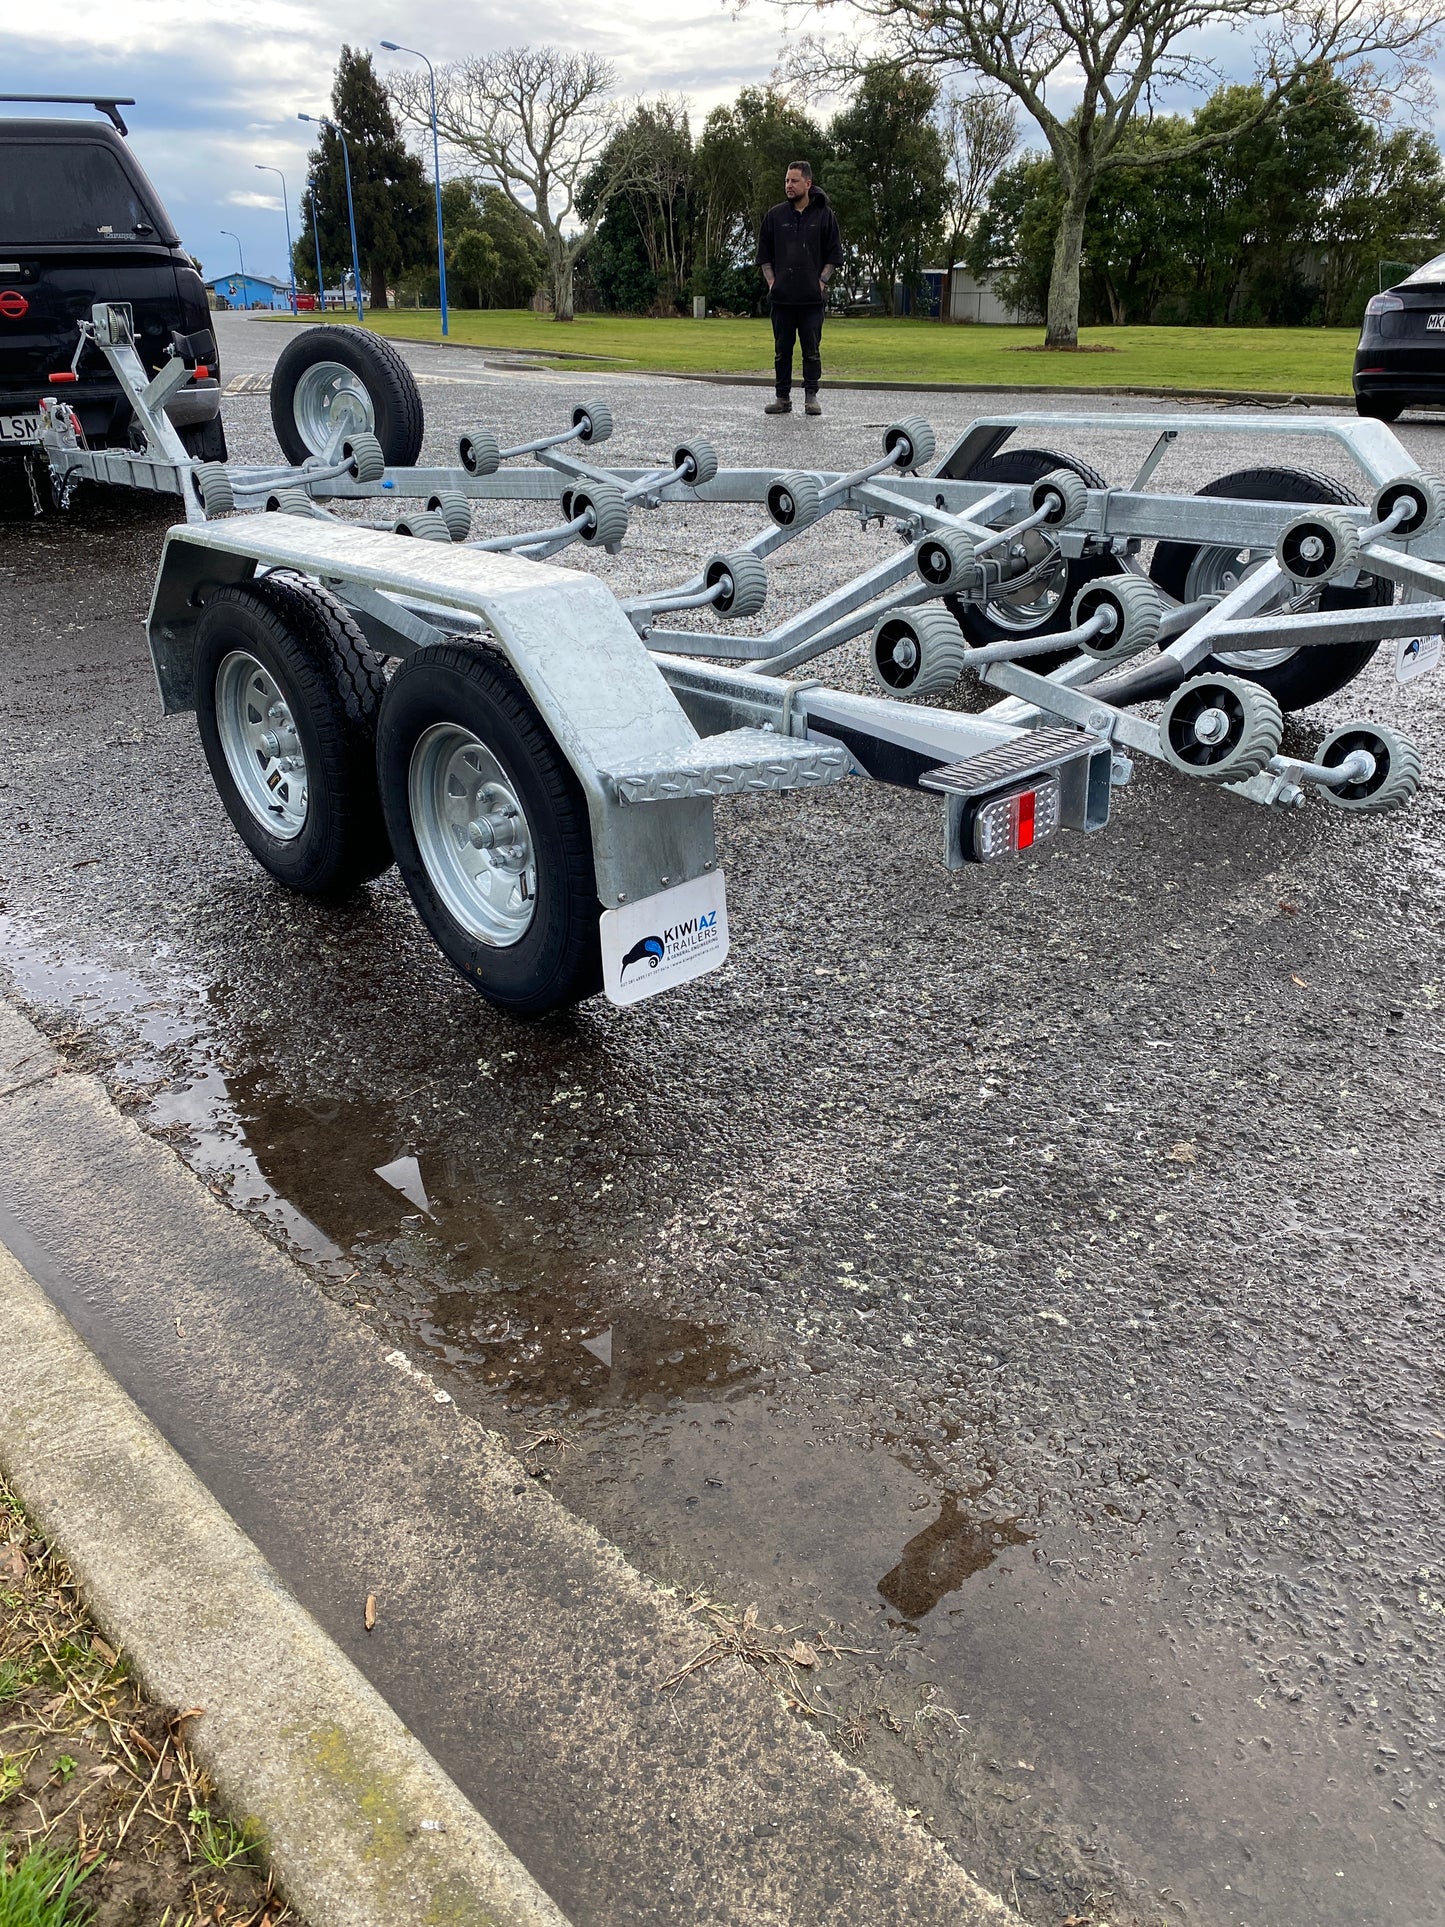 KTB646 Boat Trailer - Braked - Tandem Axle - Boat size 6 - 6.5 metres